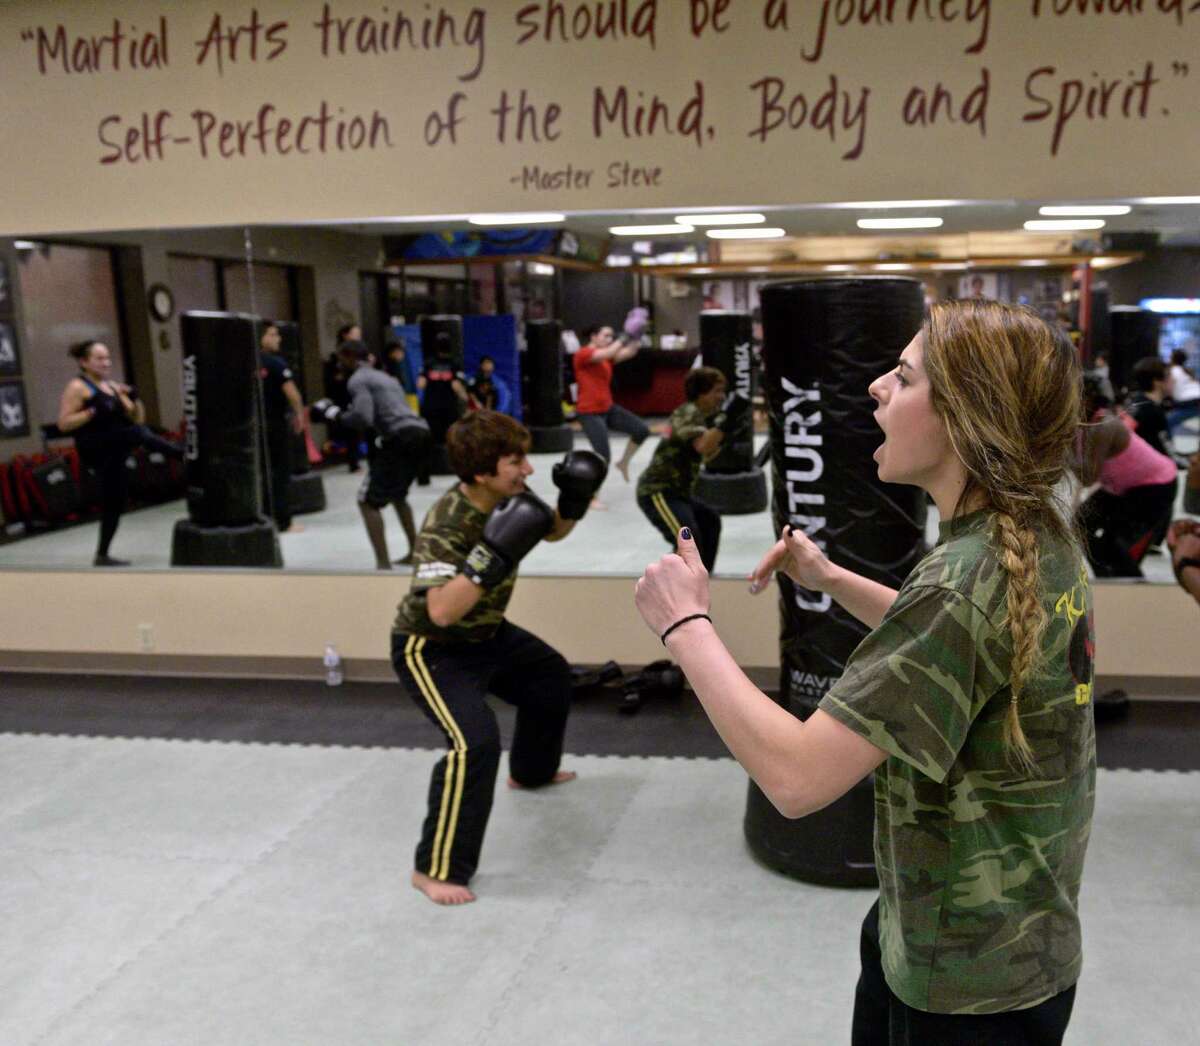 Instructor Lyndsay Doyon shouts encouragement to her KickFit class at Connecticut Martial Arts - Danbury Martial Arts Training Center on Wednesday, March 18, 2015, in Danbury, Conn.